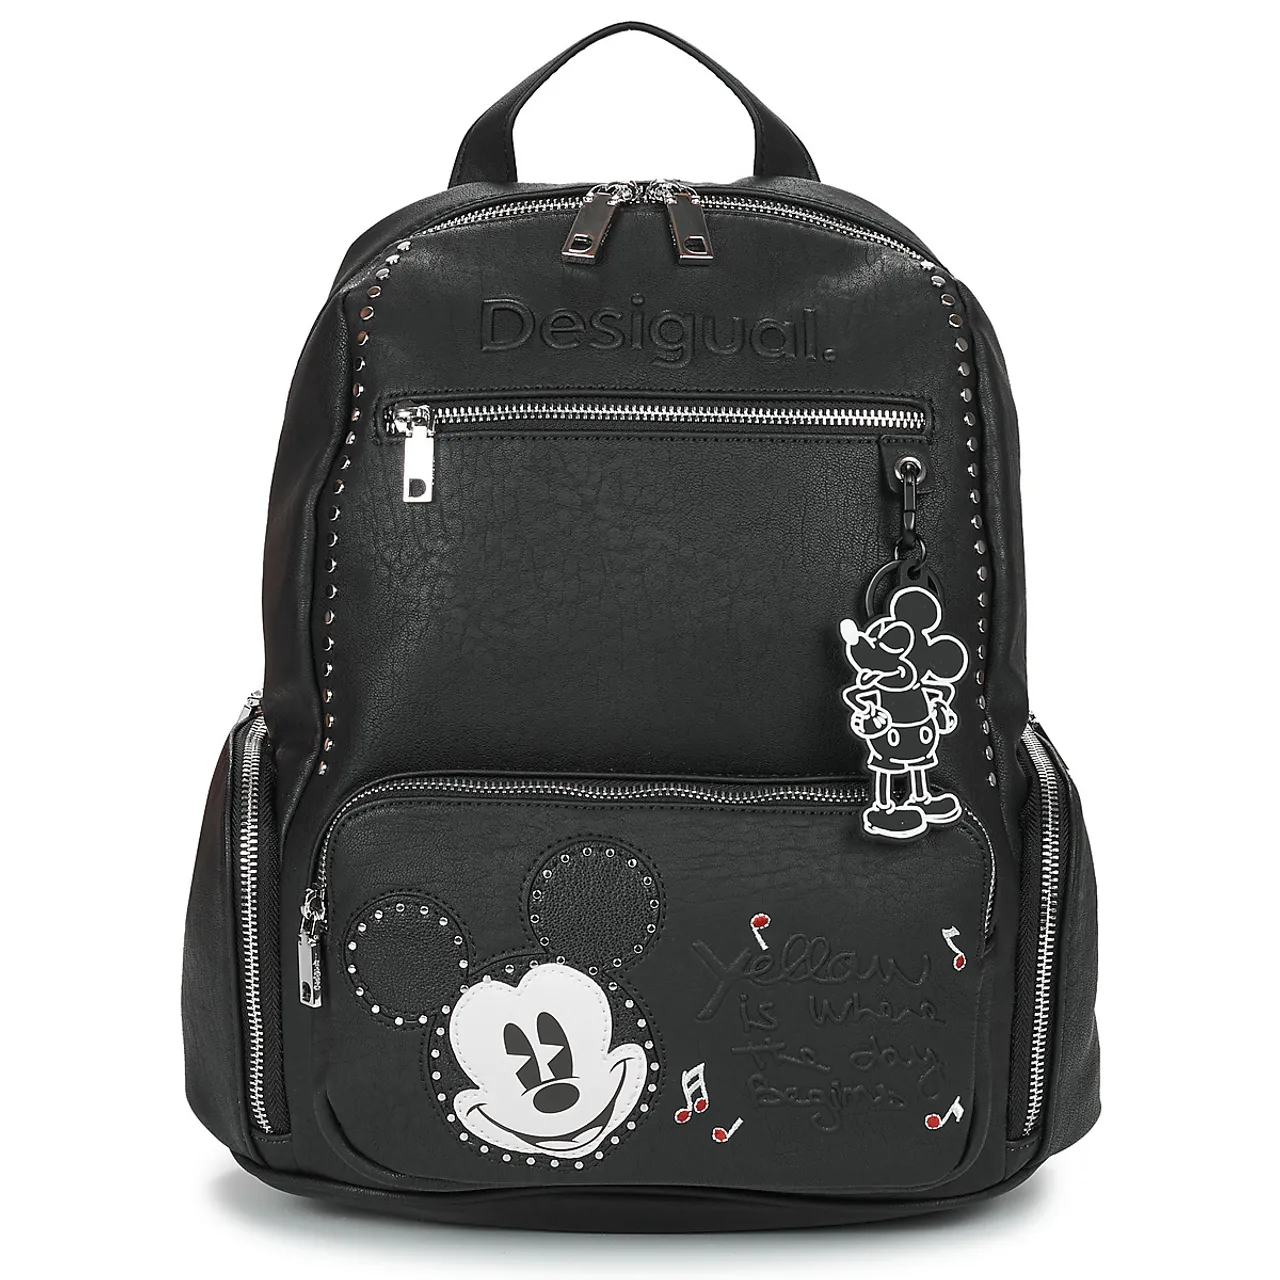 Desigual  MICKEY ROCK CHESTER  women's Backpack in Black